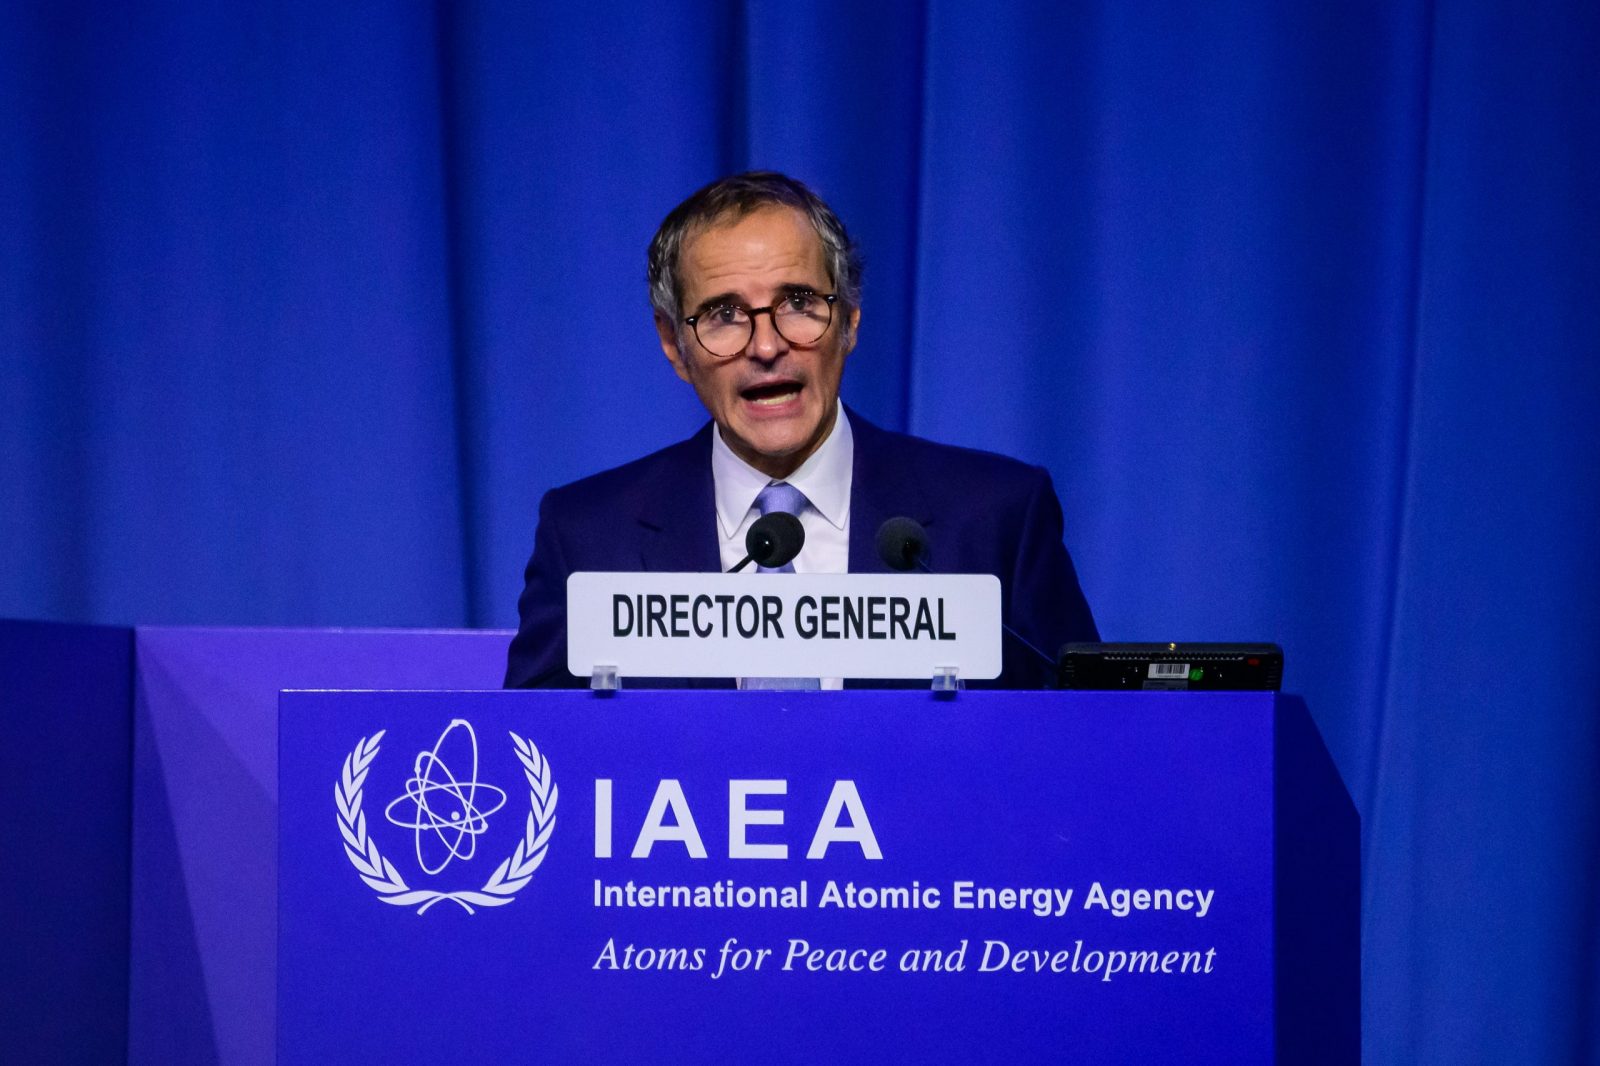 epa10882314 IAEA Director General Rafael Mariano Grossi delivers a speech during the 67th International Atomic Energy Agency (IAEA) General Conference at the IAEA headquarters of the UN seat in Vienna, Austria, 25 September 2023. The 67th Regular Session of the IAEA General Conference in Vienna runs from 25 to 29 September 2023.  EPA/CHRISTIAN BRUNA